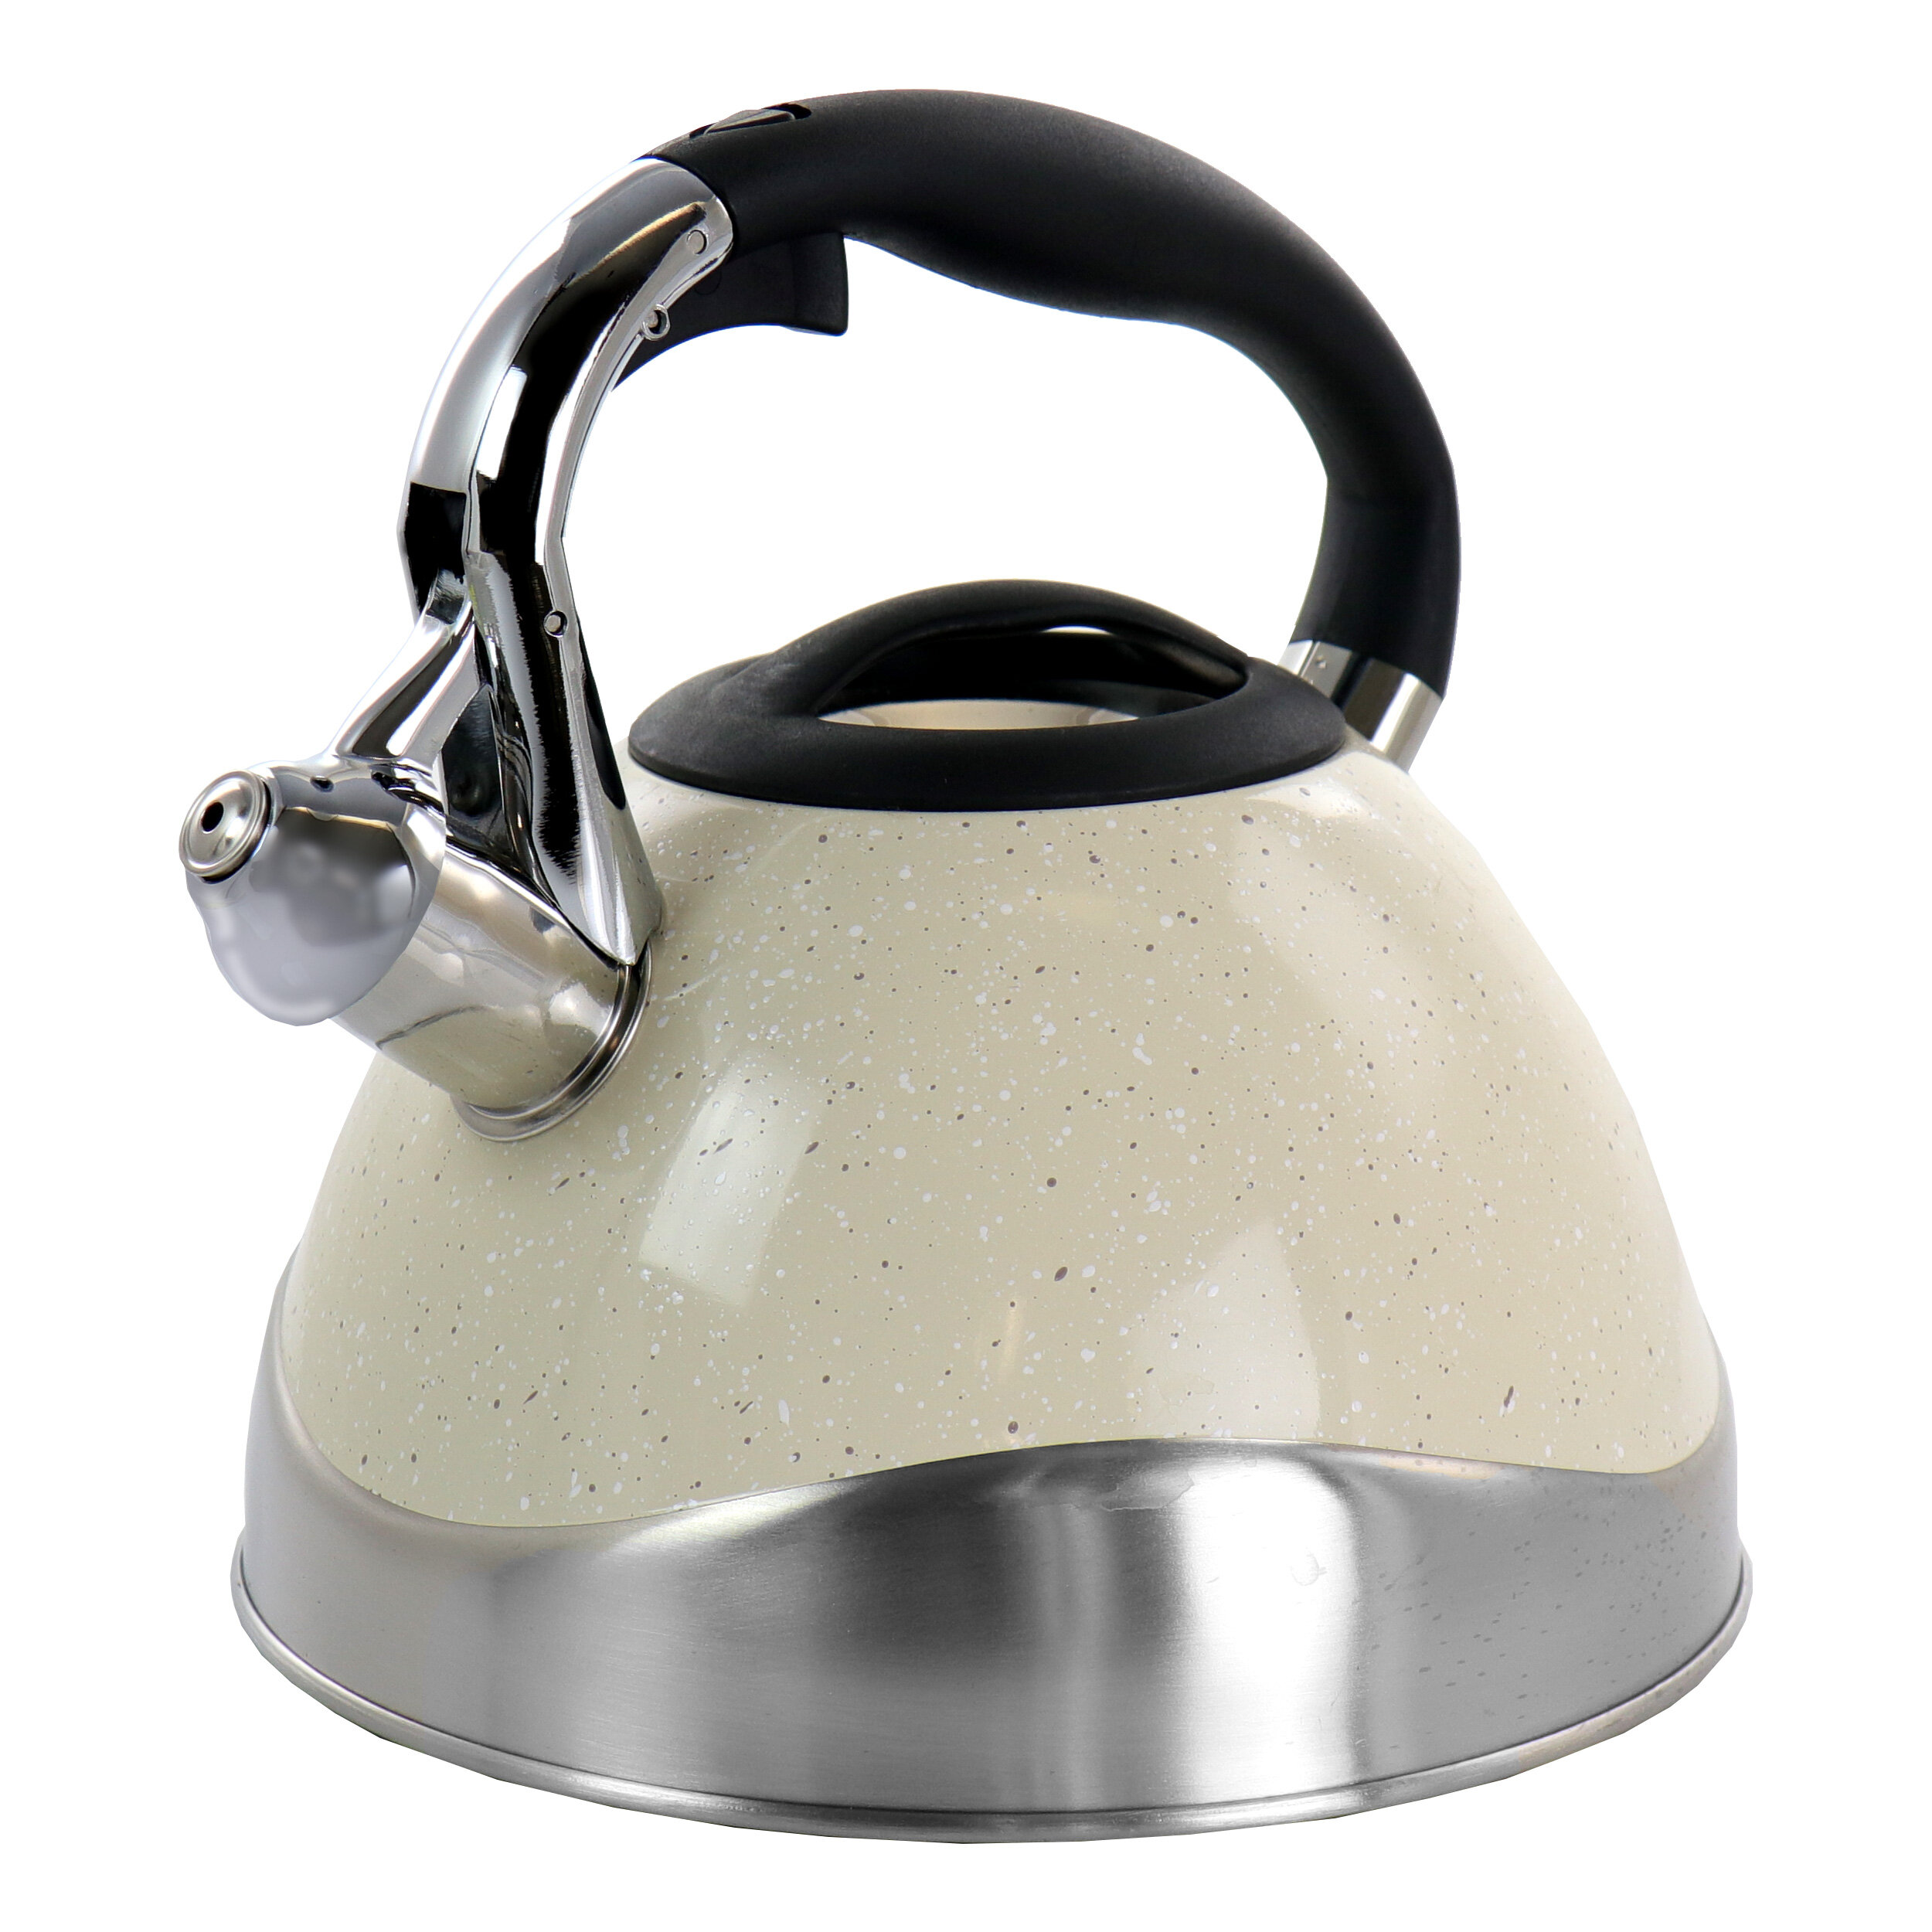 Mega Chef 3 Quarts Stainless Steel Whistling Stovetop Tea Kettle & Reviews